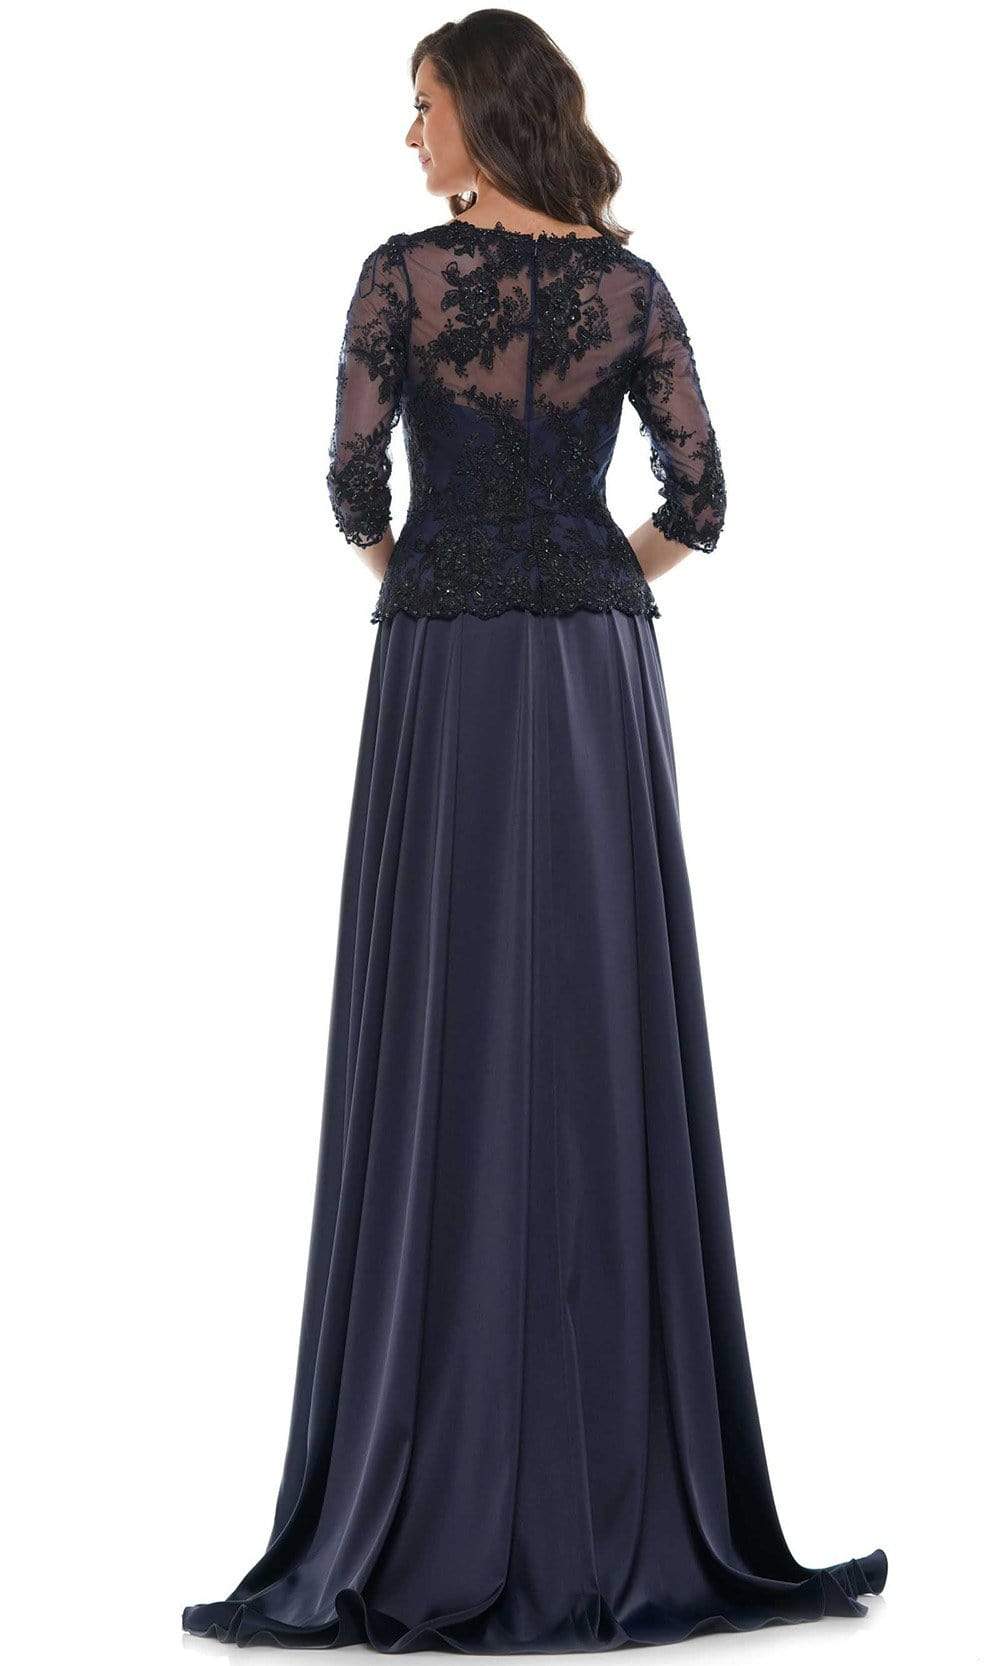 Rina Di Montella - RD2720 Semi-Sheer Embroidered Bodice Satin Gown Mother of the Bride Dresses